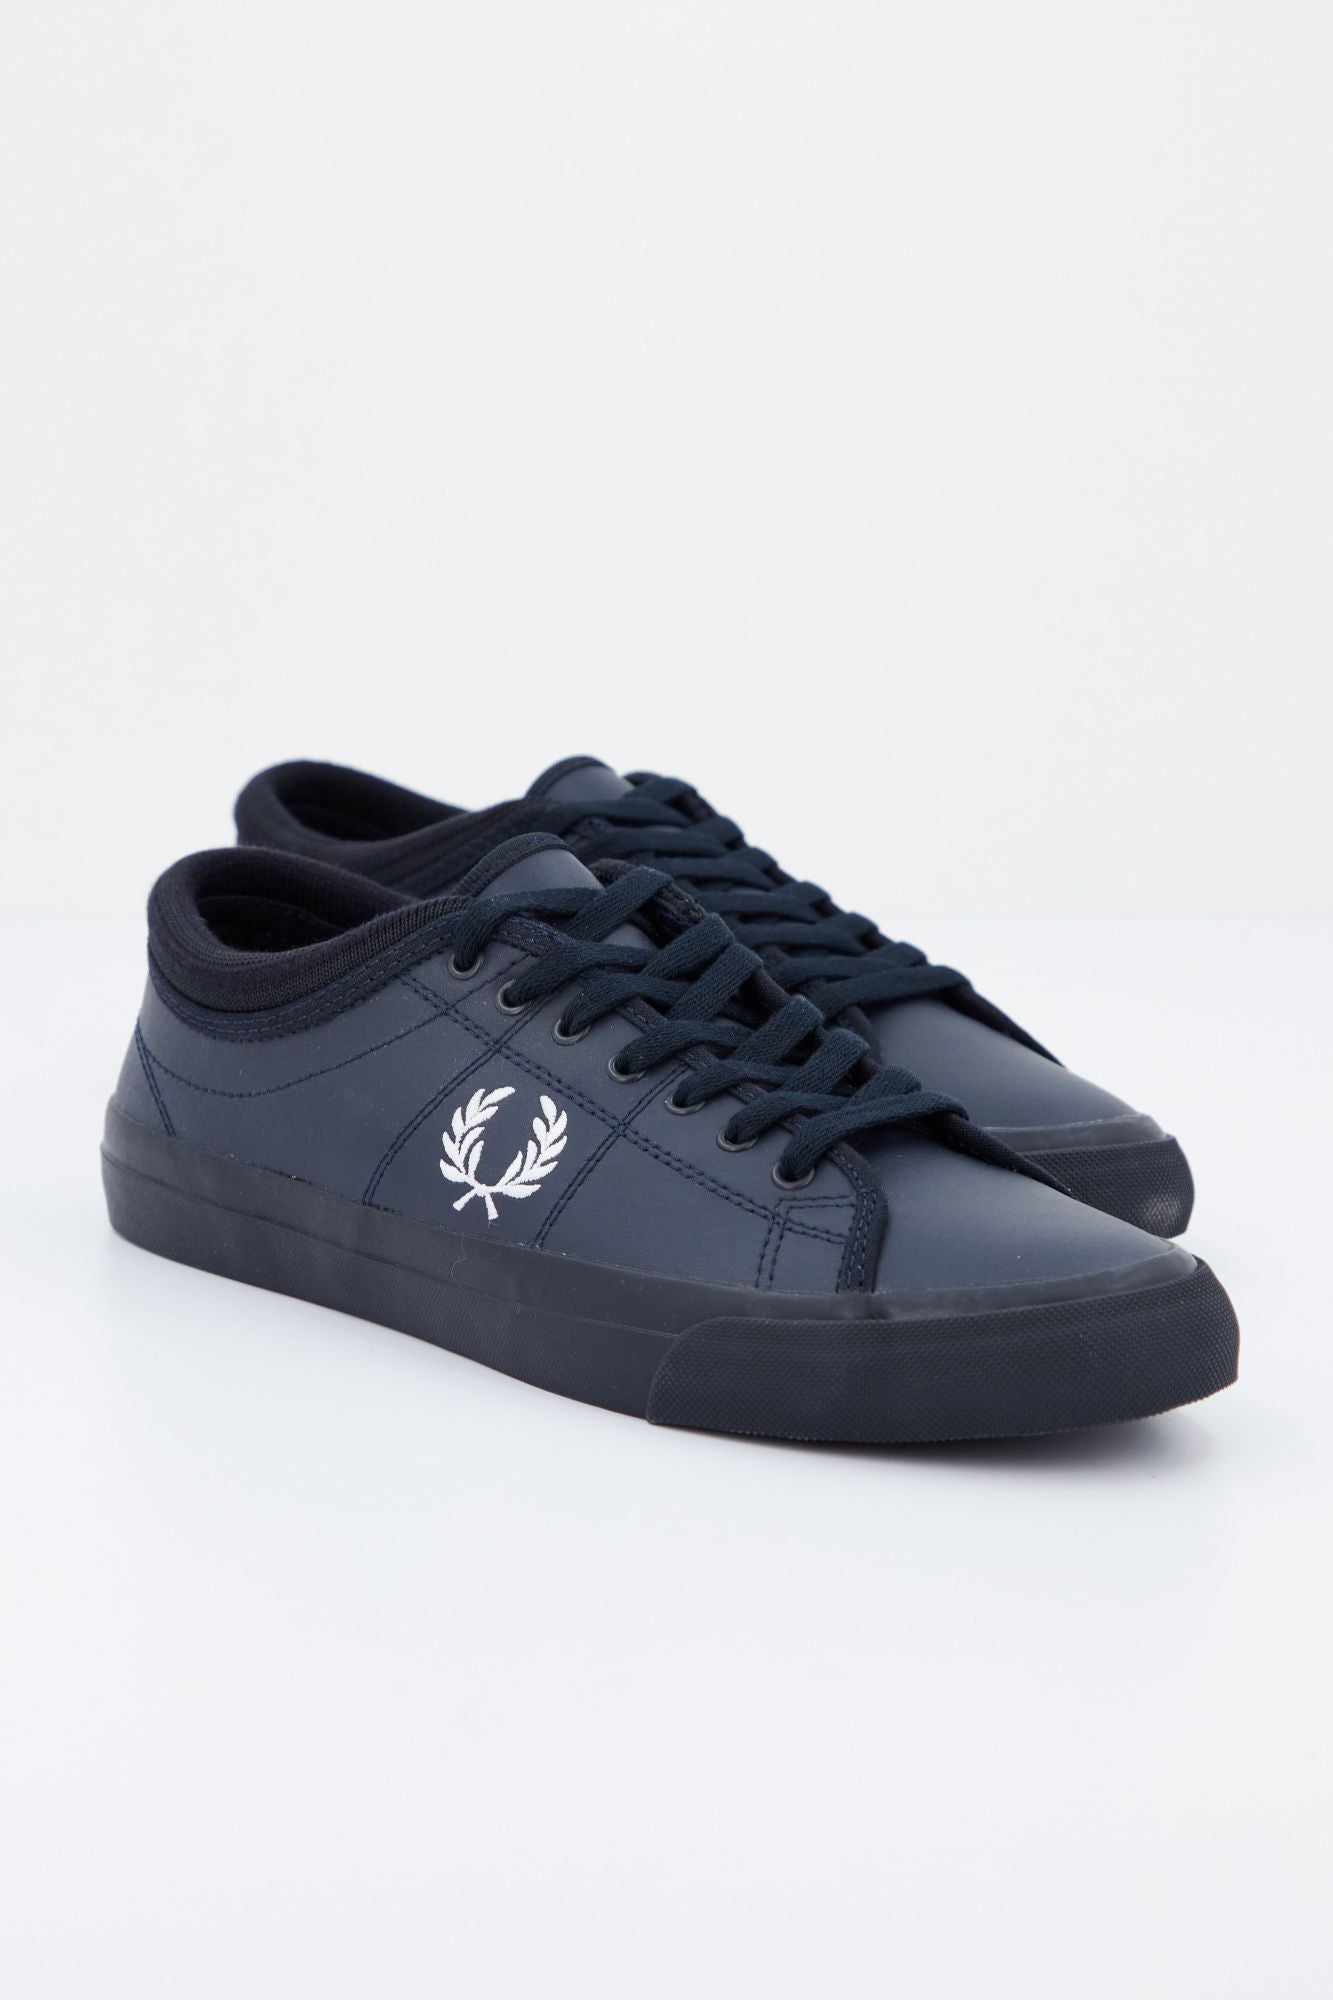 FRED PERRY  KENDRICK LEATHER en color AZUL (1)